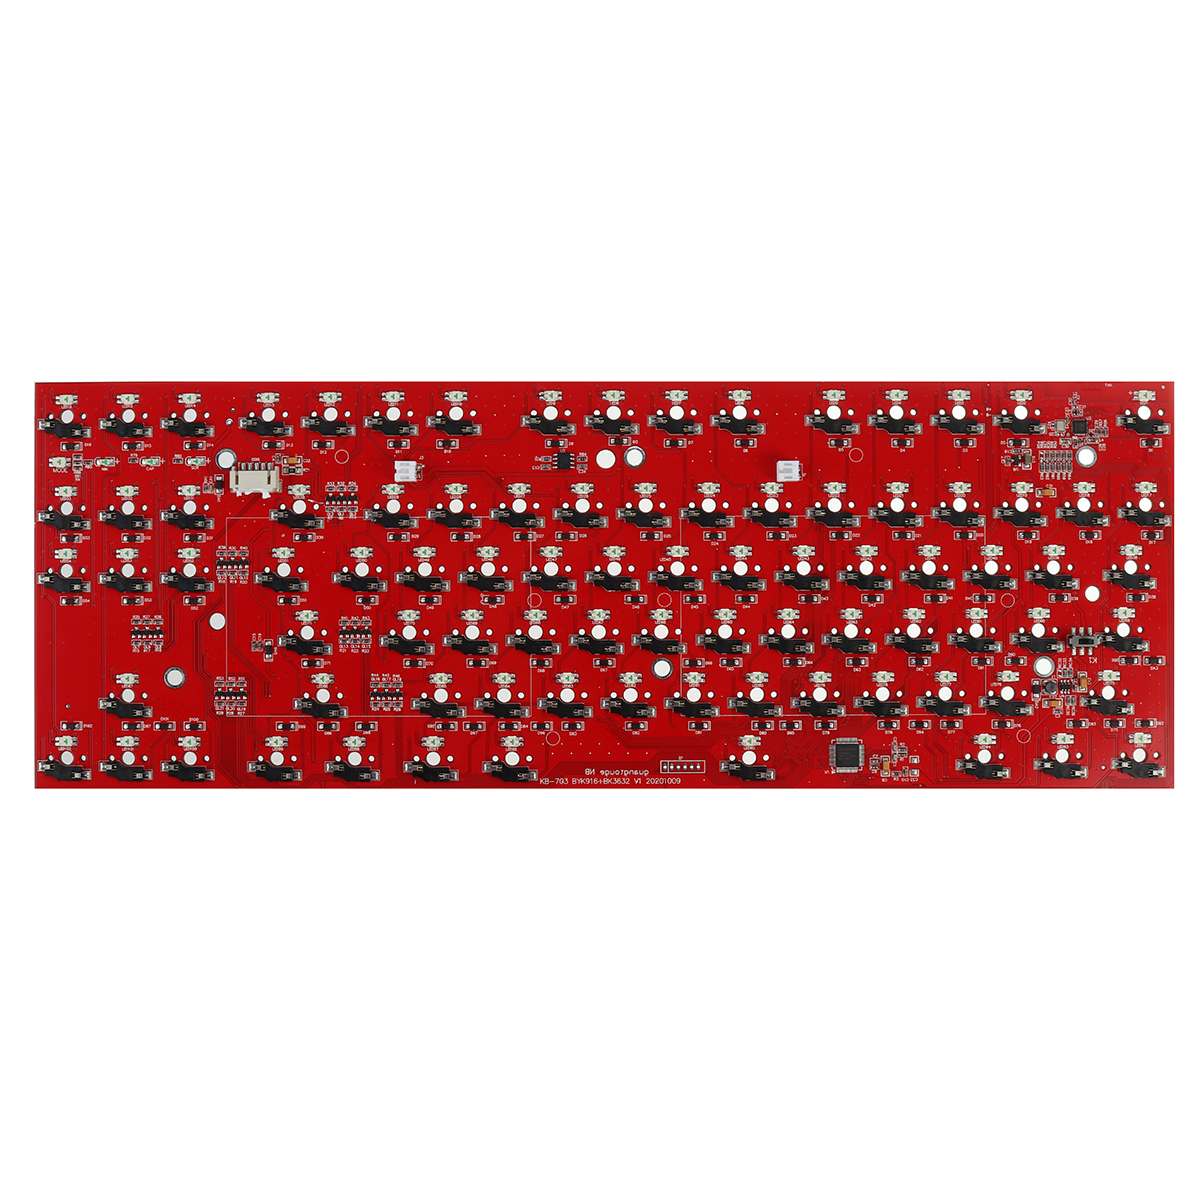 FEKER-87-Keys-Customized-Keyboard-Kit-Hotswappable-24G-bluetooth-RGB-Backlight-Frosted-ABS-Case-DIY--1876697-9